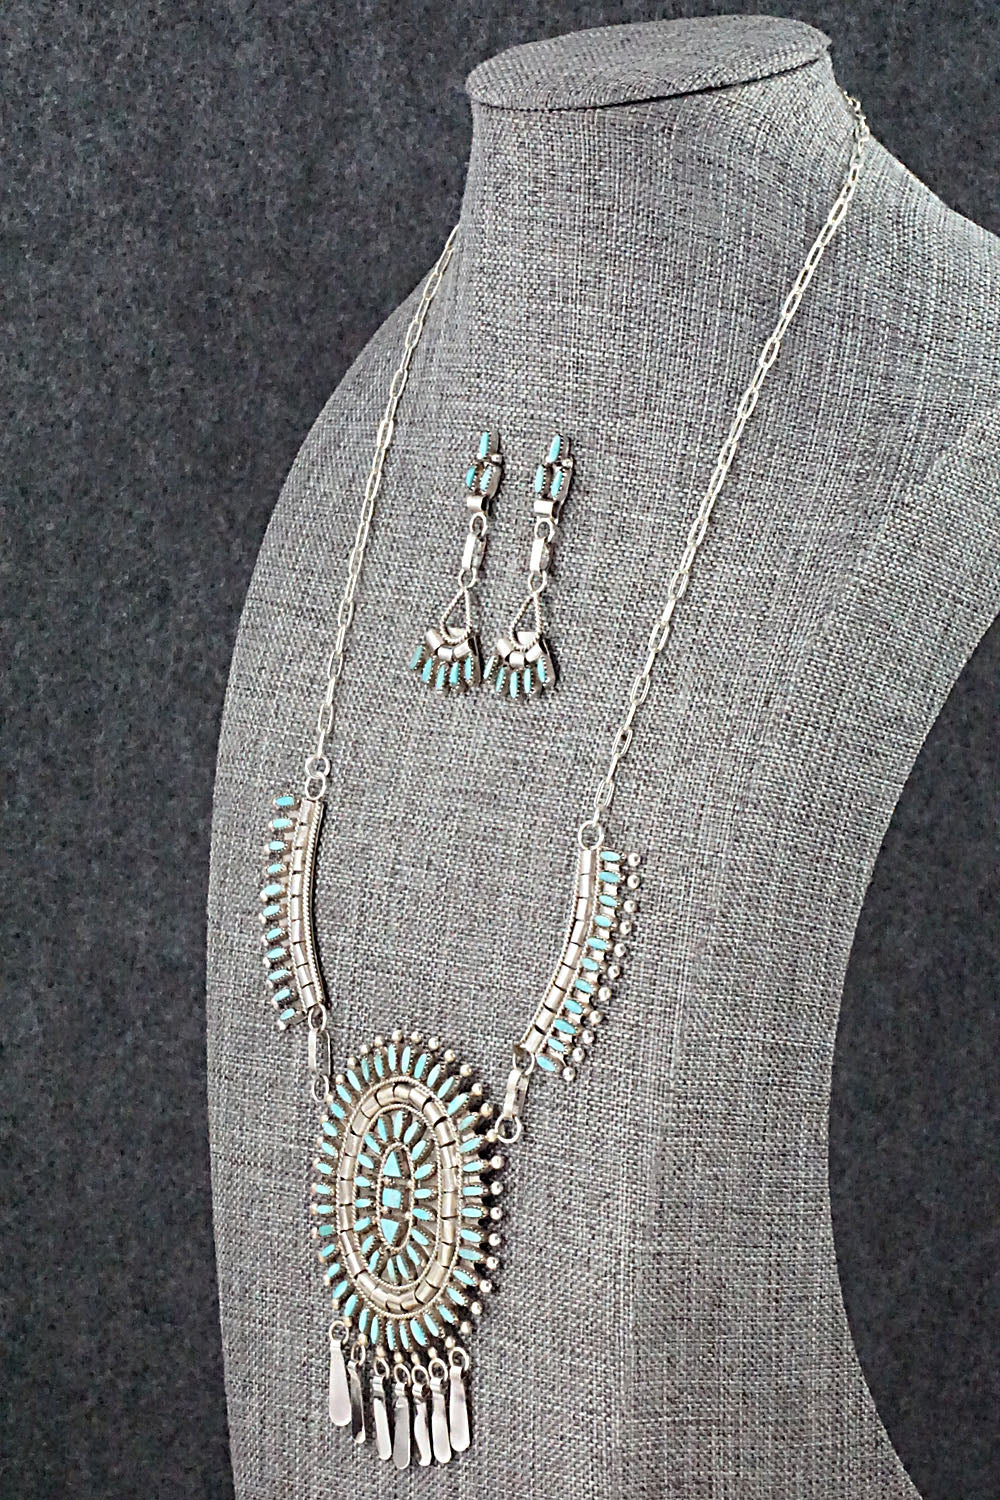 Turquoise & Sterling Silver Necklace and Earrings Set - Evonne Hustito